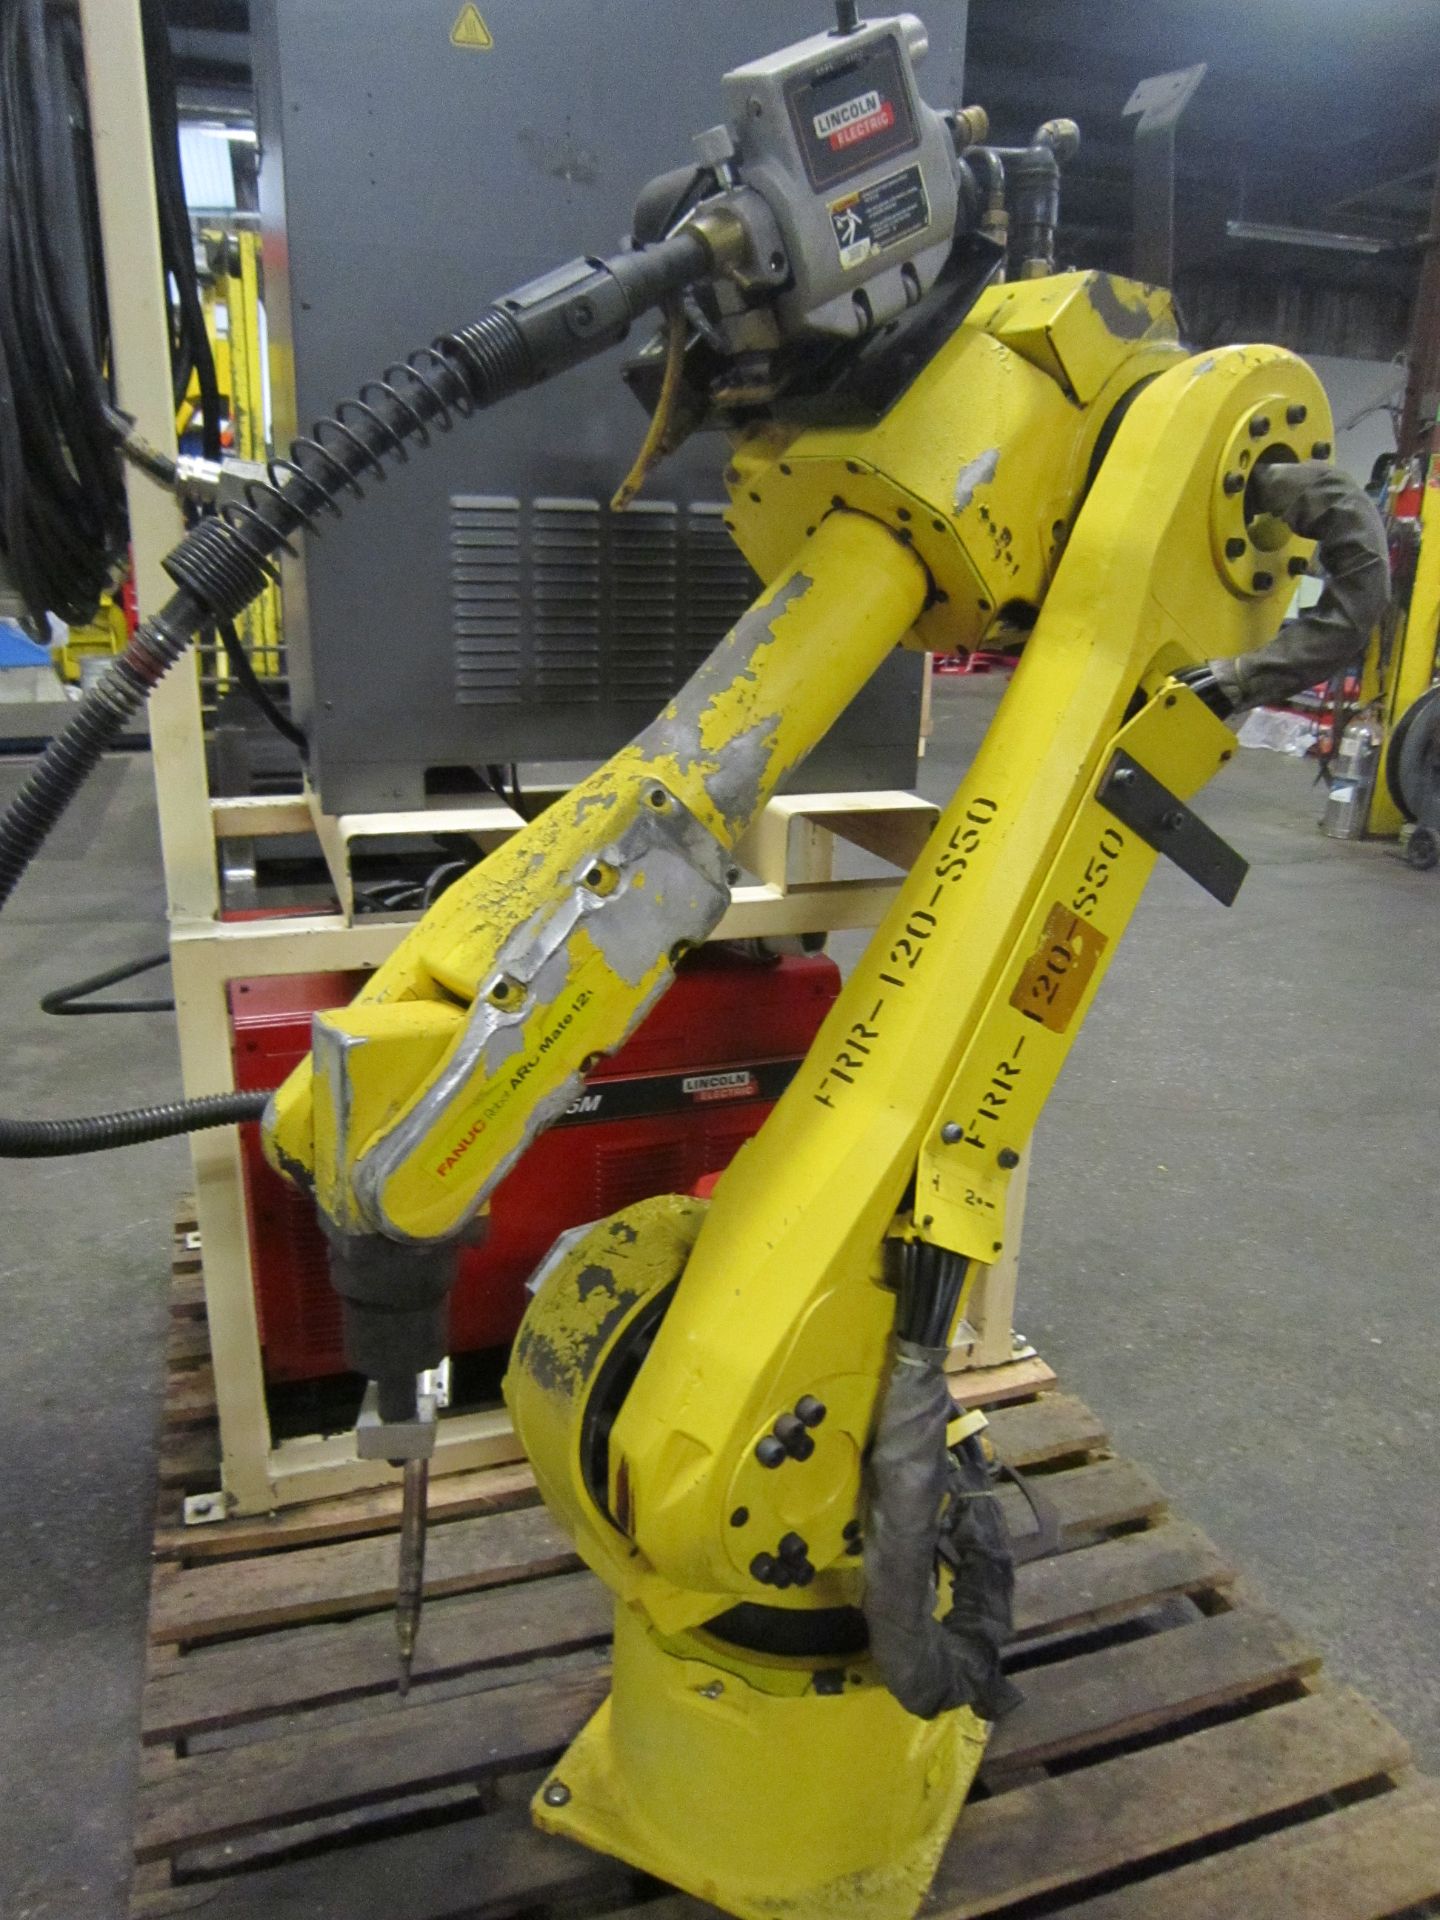 Fanuc Arcmate 120iB Welding Robot with RJ3iB Controller, teach pendant control with Lincoln